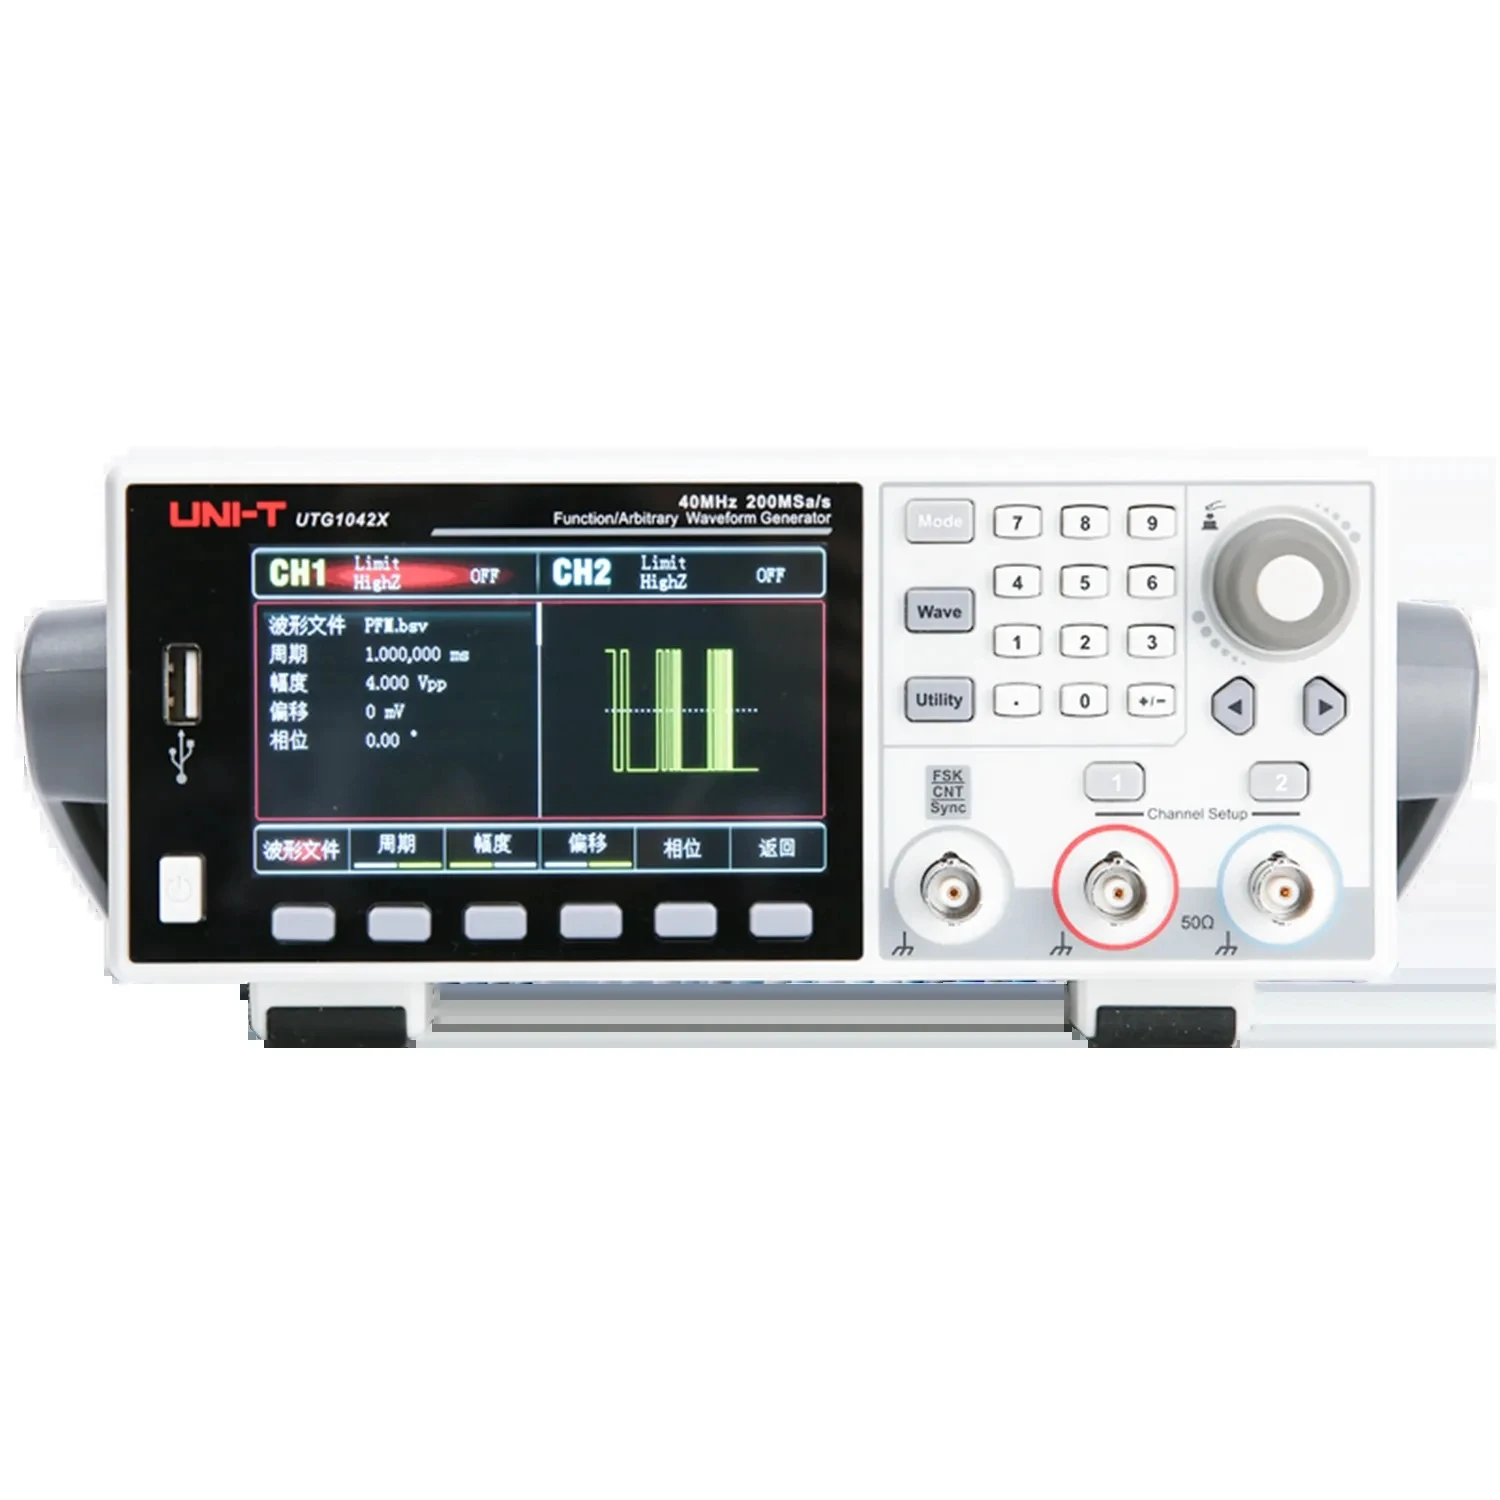 

UNI-T UTG1022X 20MHz 2 Channel Function/arbitrary Waveform Generator Professional Frequency Meter Multifunctional UTG1000X